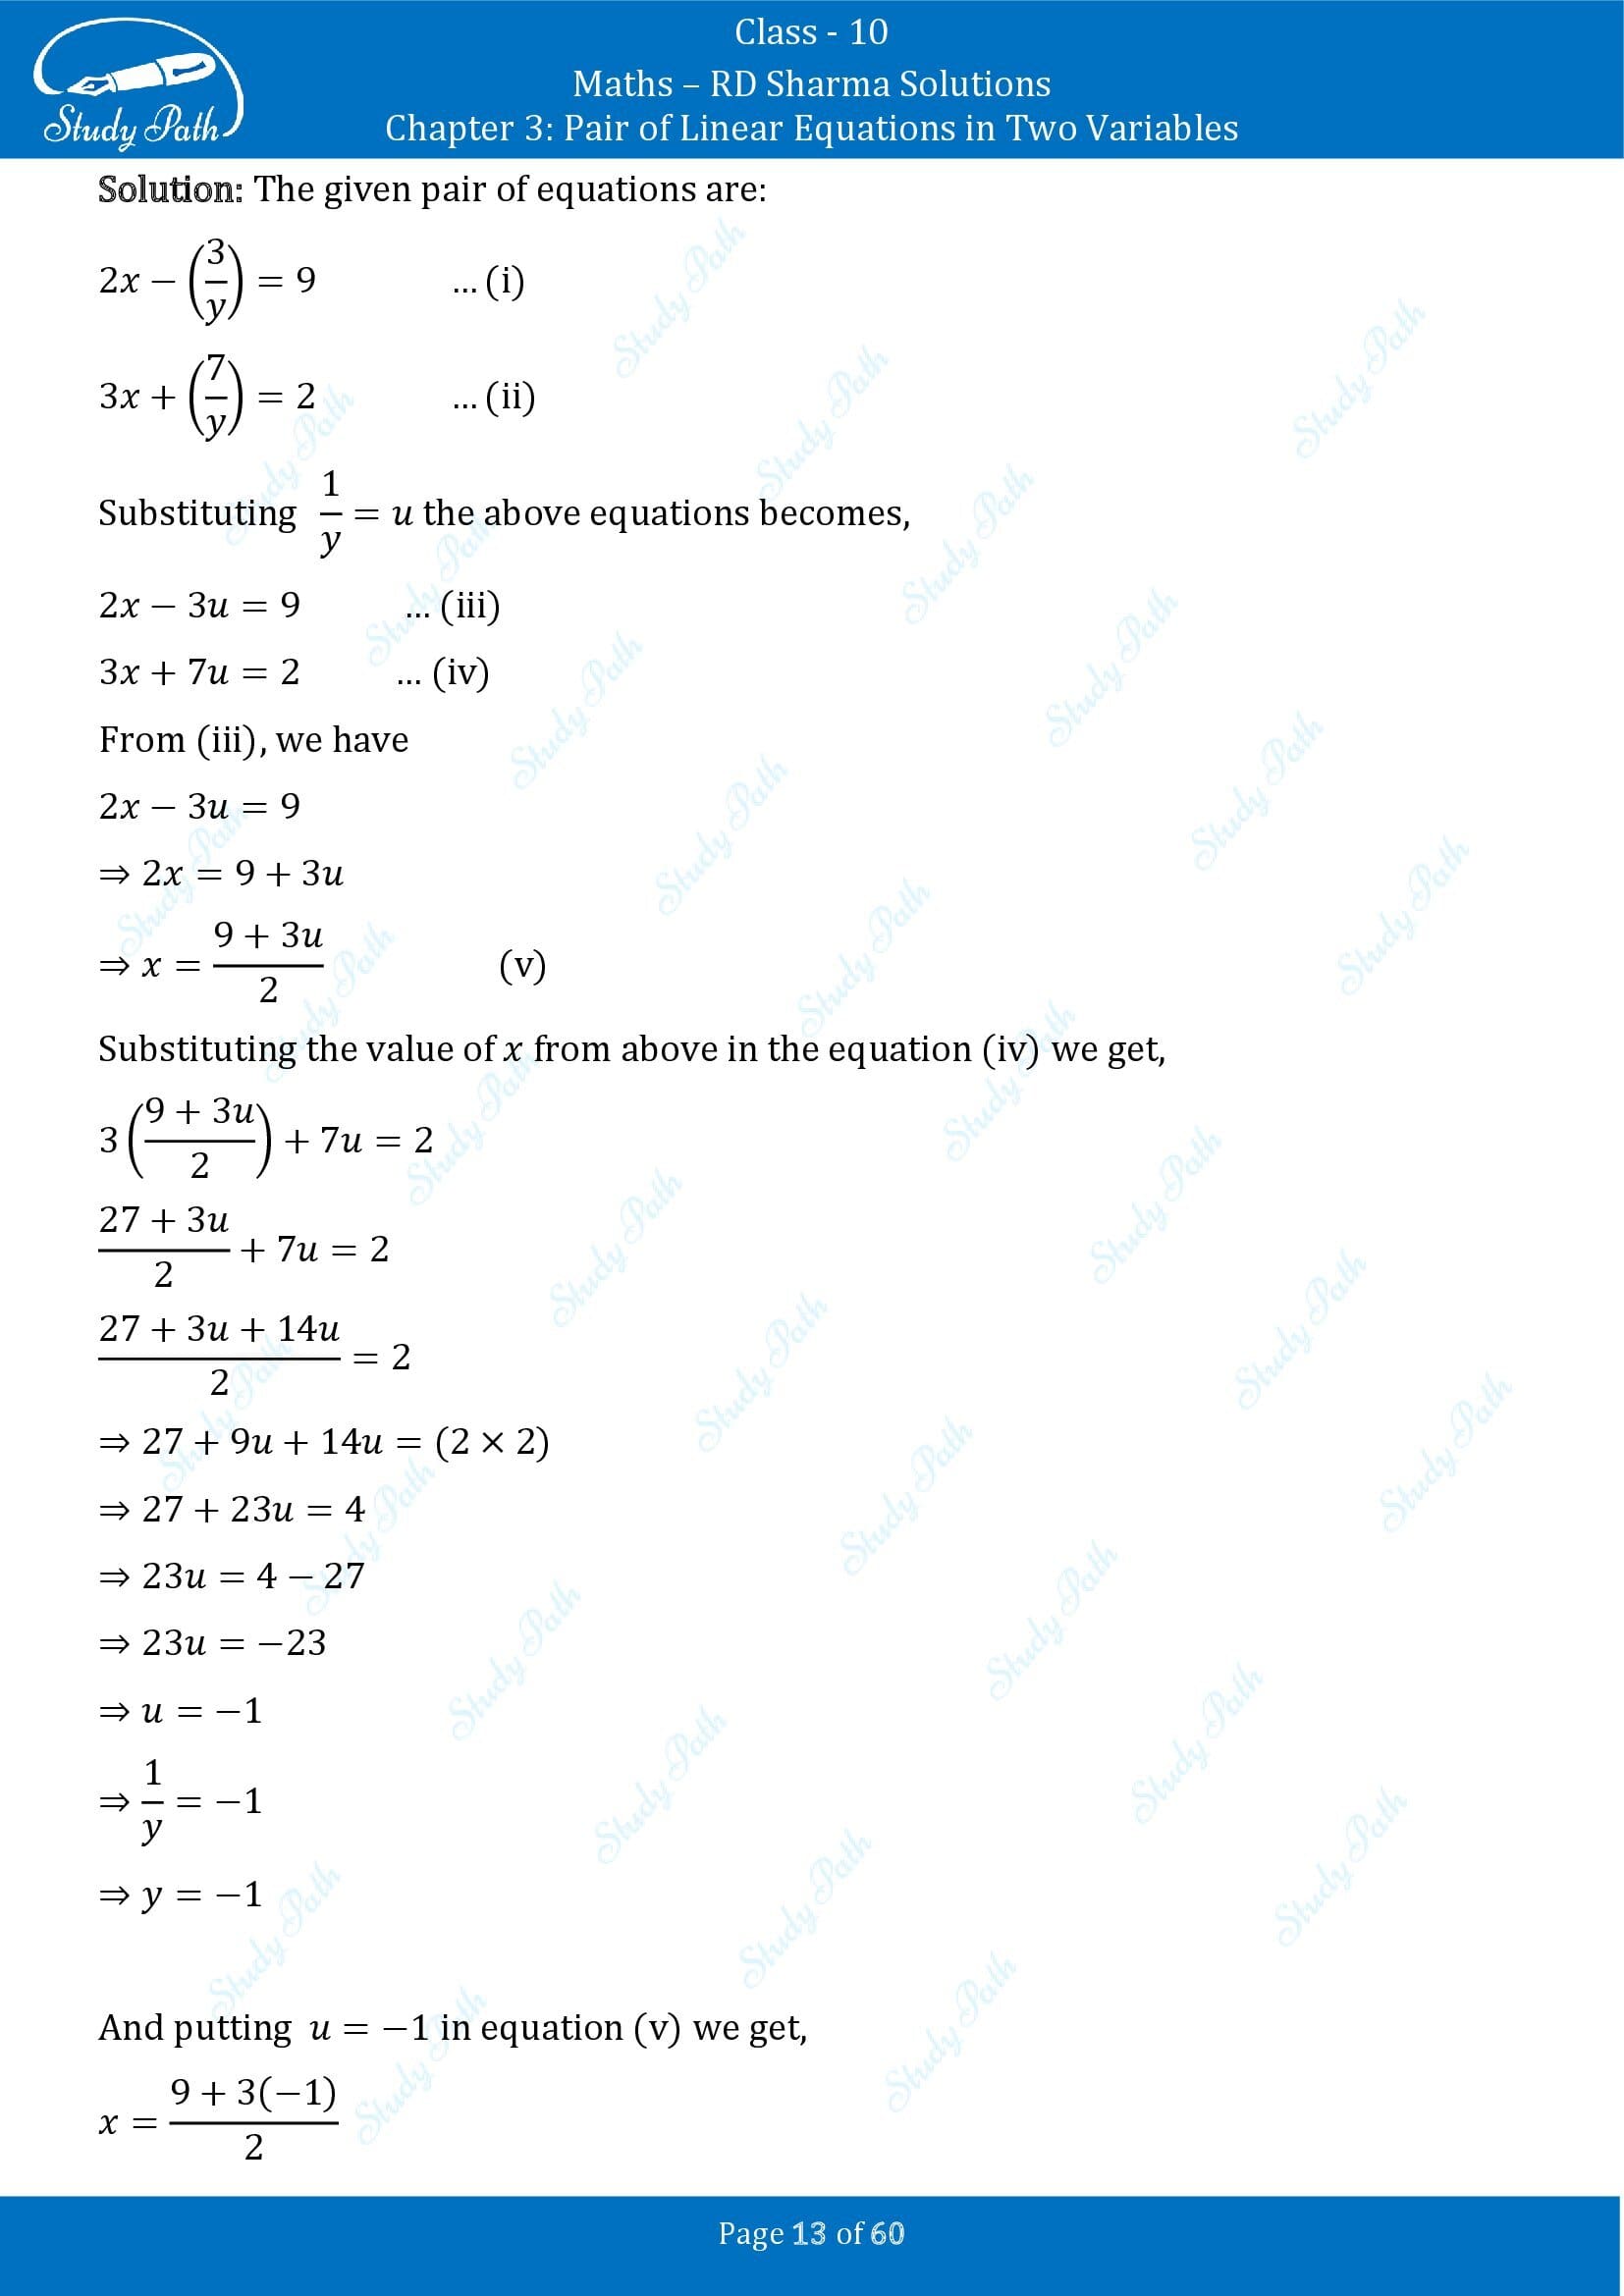 RD Sharma Solutions Class 10 Chapter 3 Pair of Linear Equations in Two Variables Exercise 3.3 00013